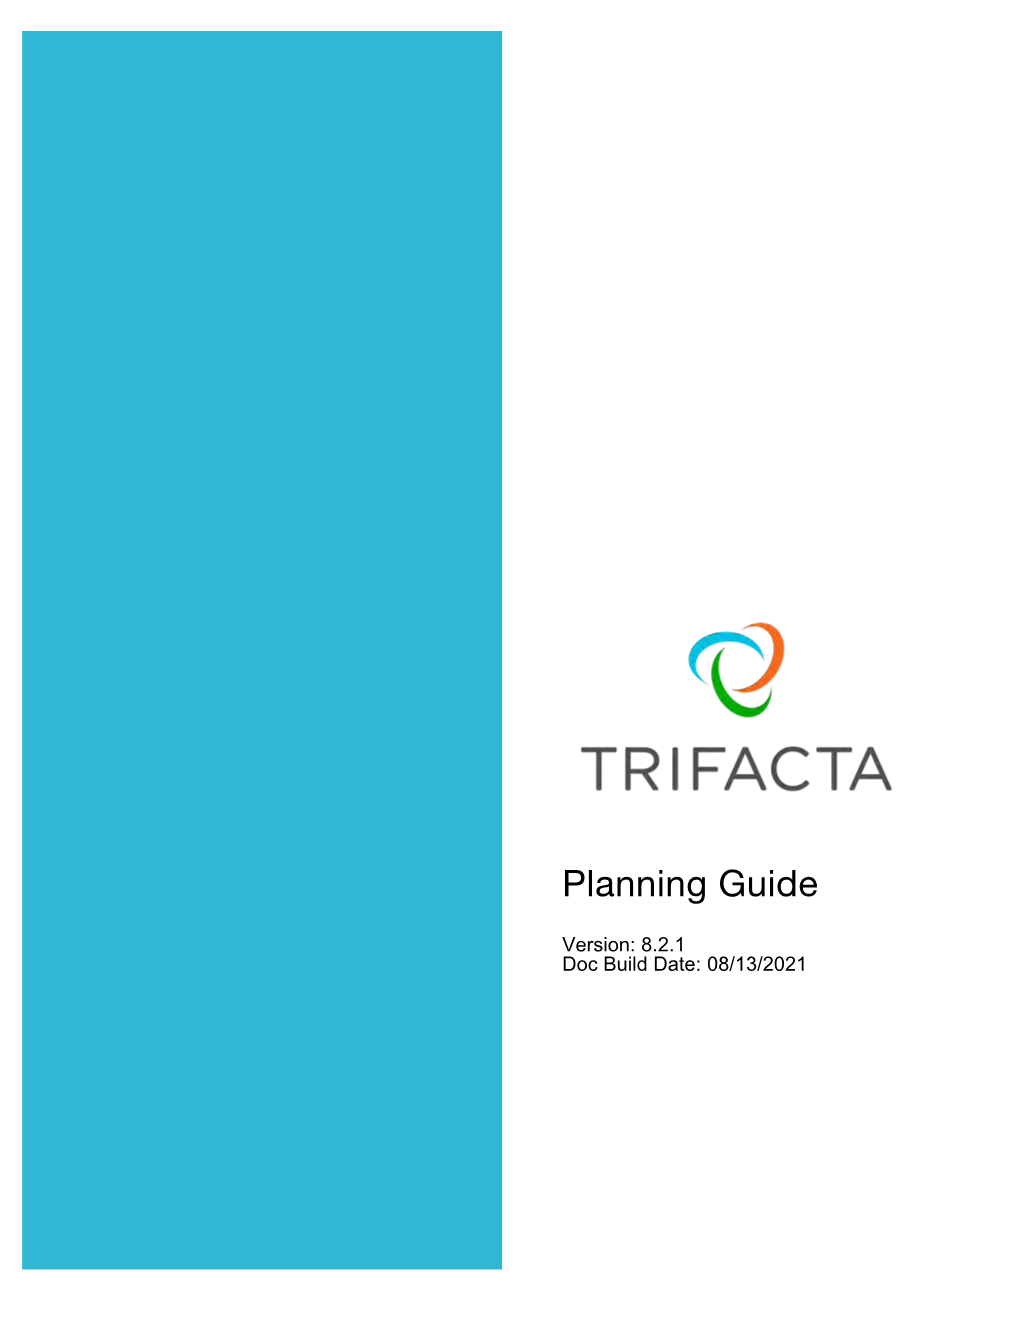 Trifacta Planning Guide